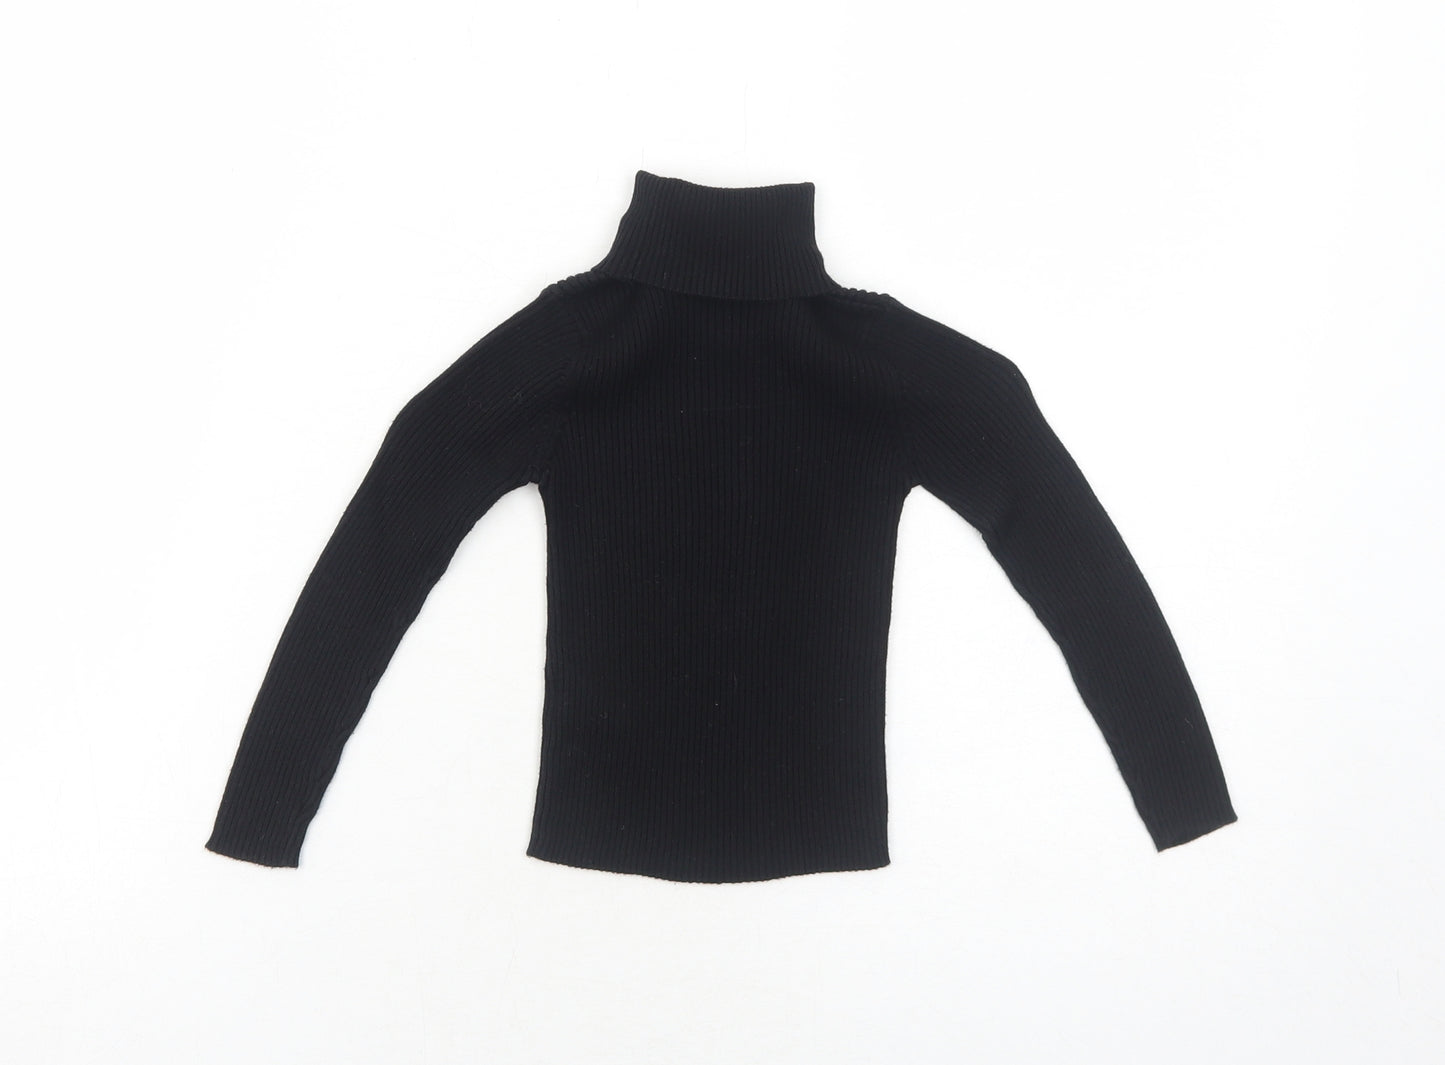 NEXT Girls Black Cotton Basic T-Shirt Size 4 Years Roll Neck Pullover - Ribbed